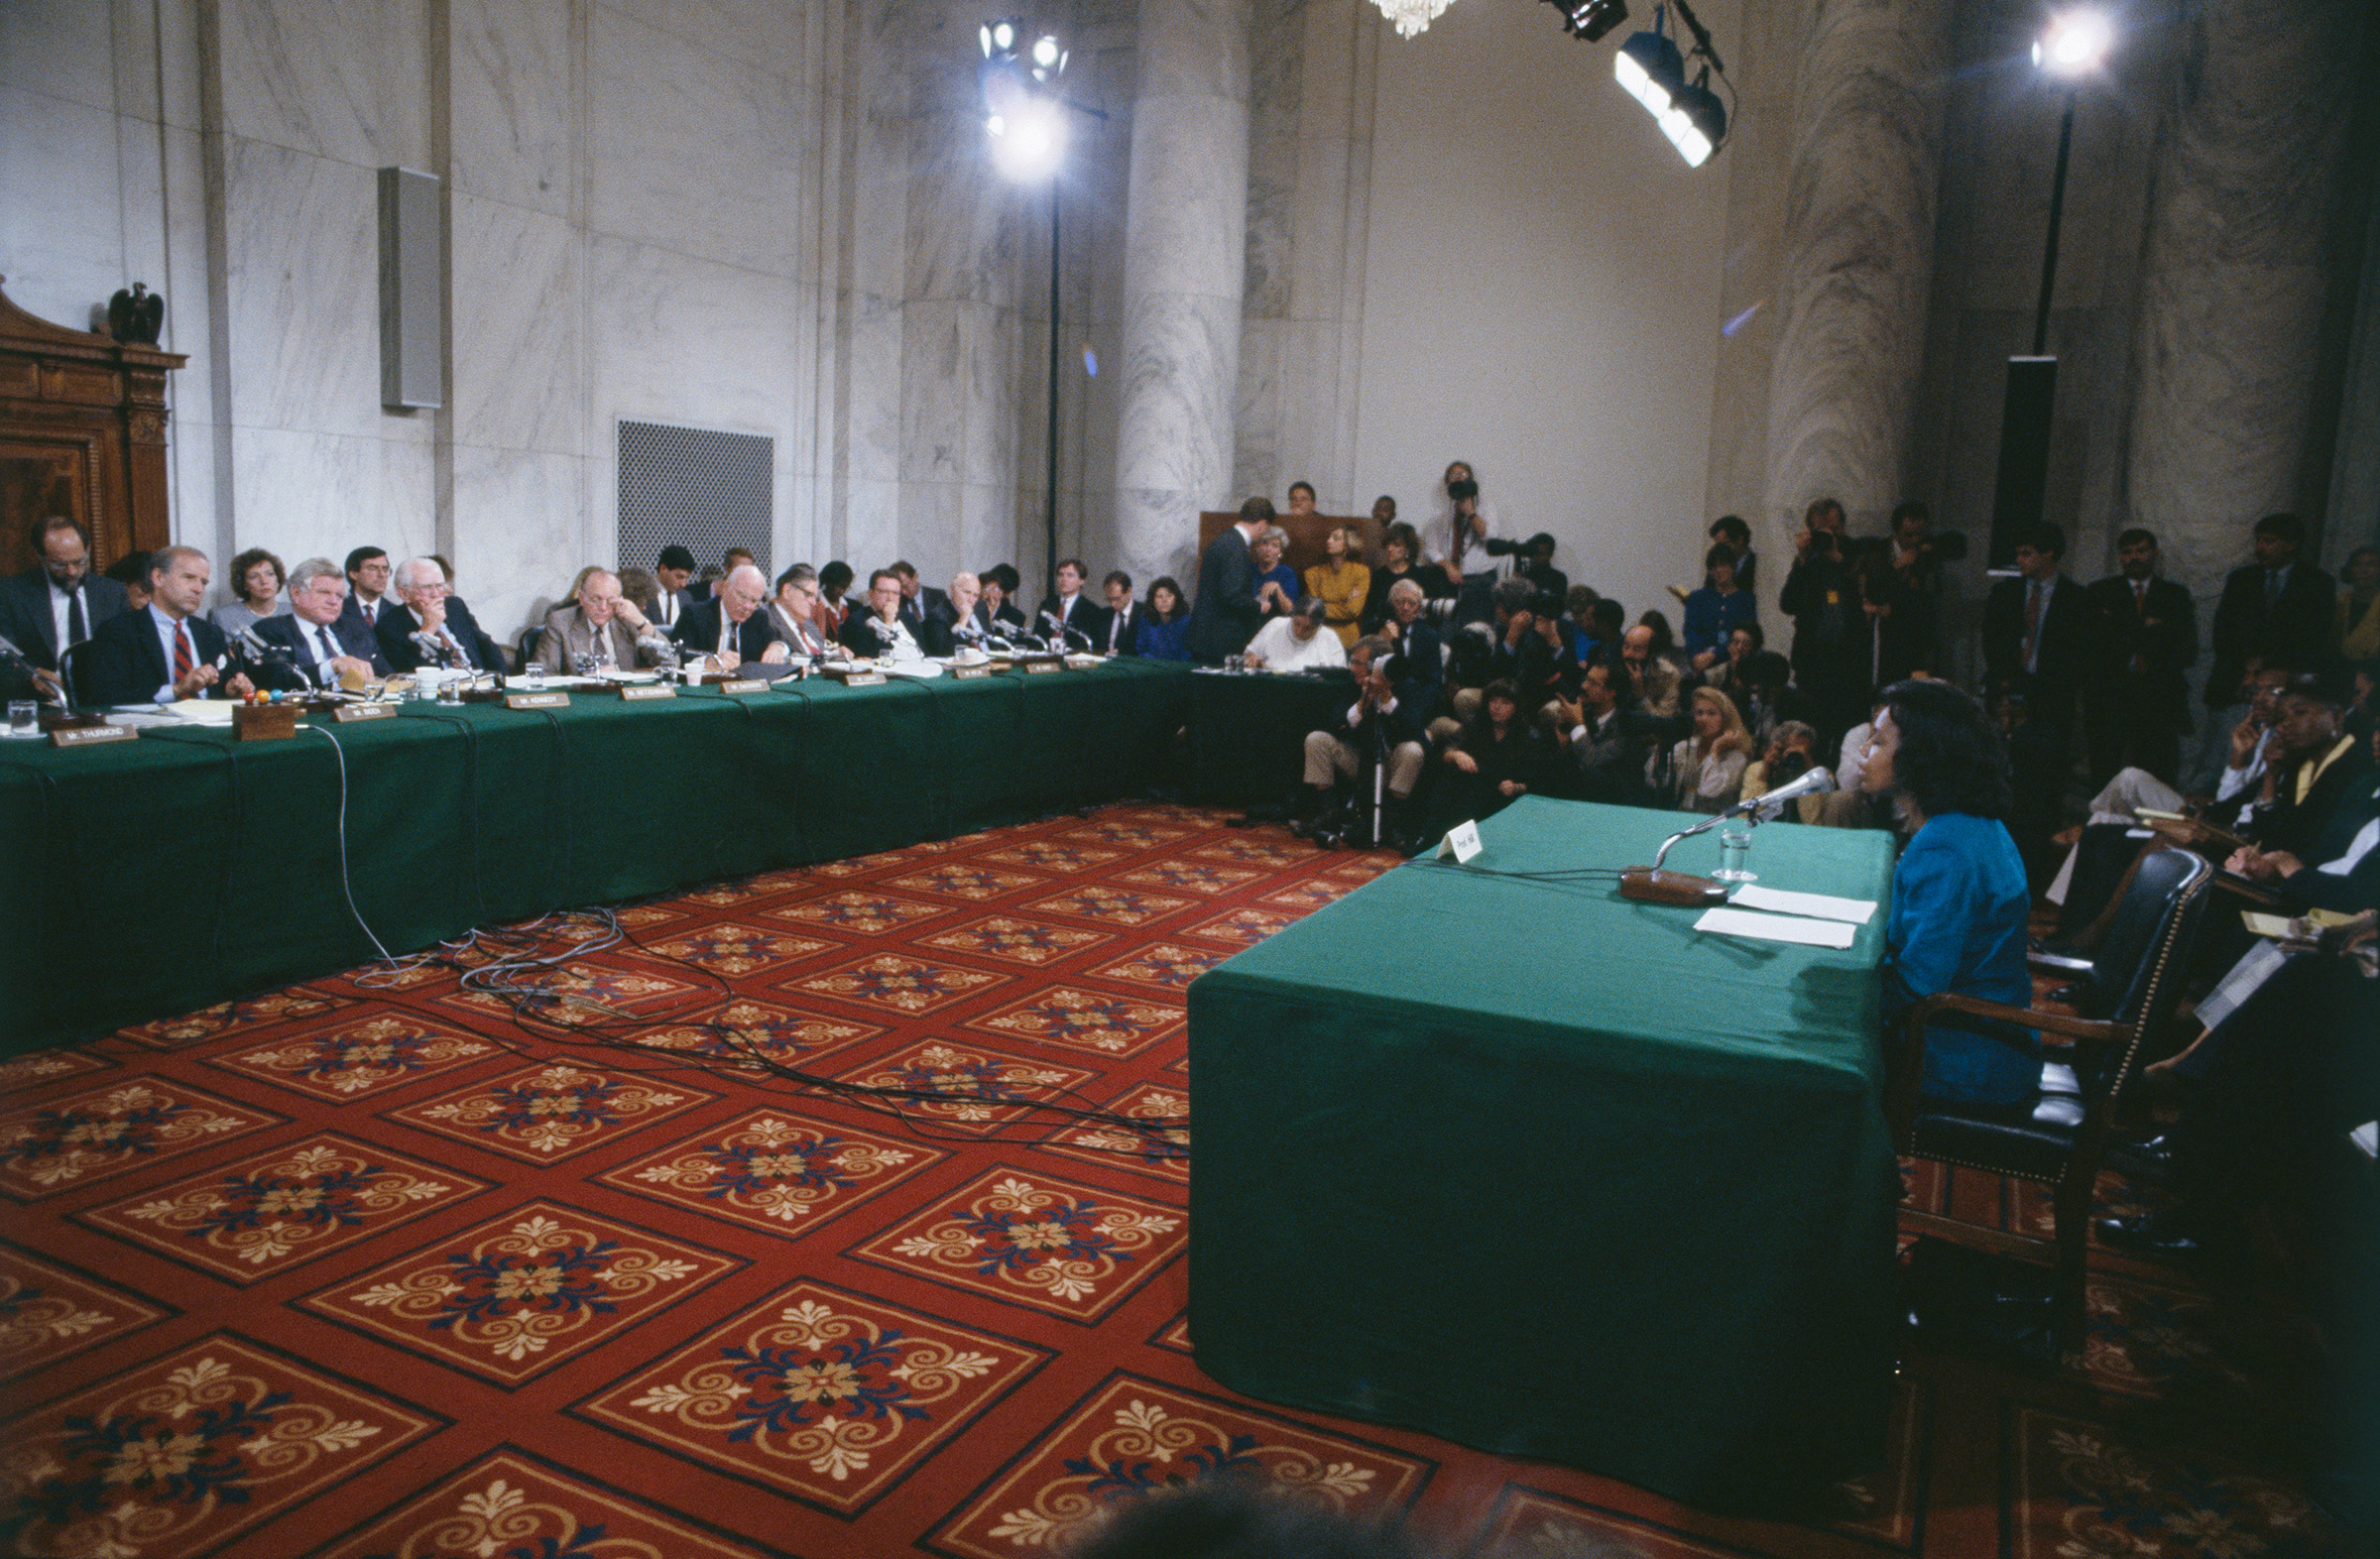 Anita Hill testifies before the Senate Judiciary Committee, chaired by Joe Biden, on the nomination of Clarence Thomas to the Supreme Court on Capitol Hill in Washington, D.C., on Oct. 11, 1991. (Jeffrey Markowitz—Sygma/Getty Images)